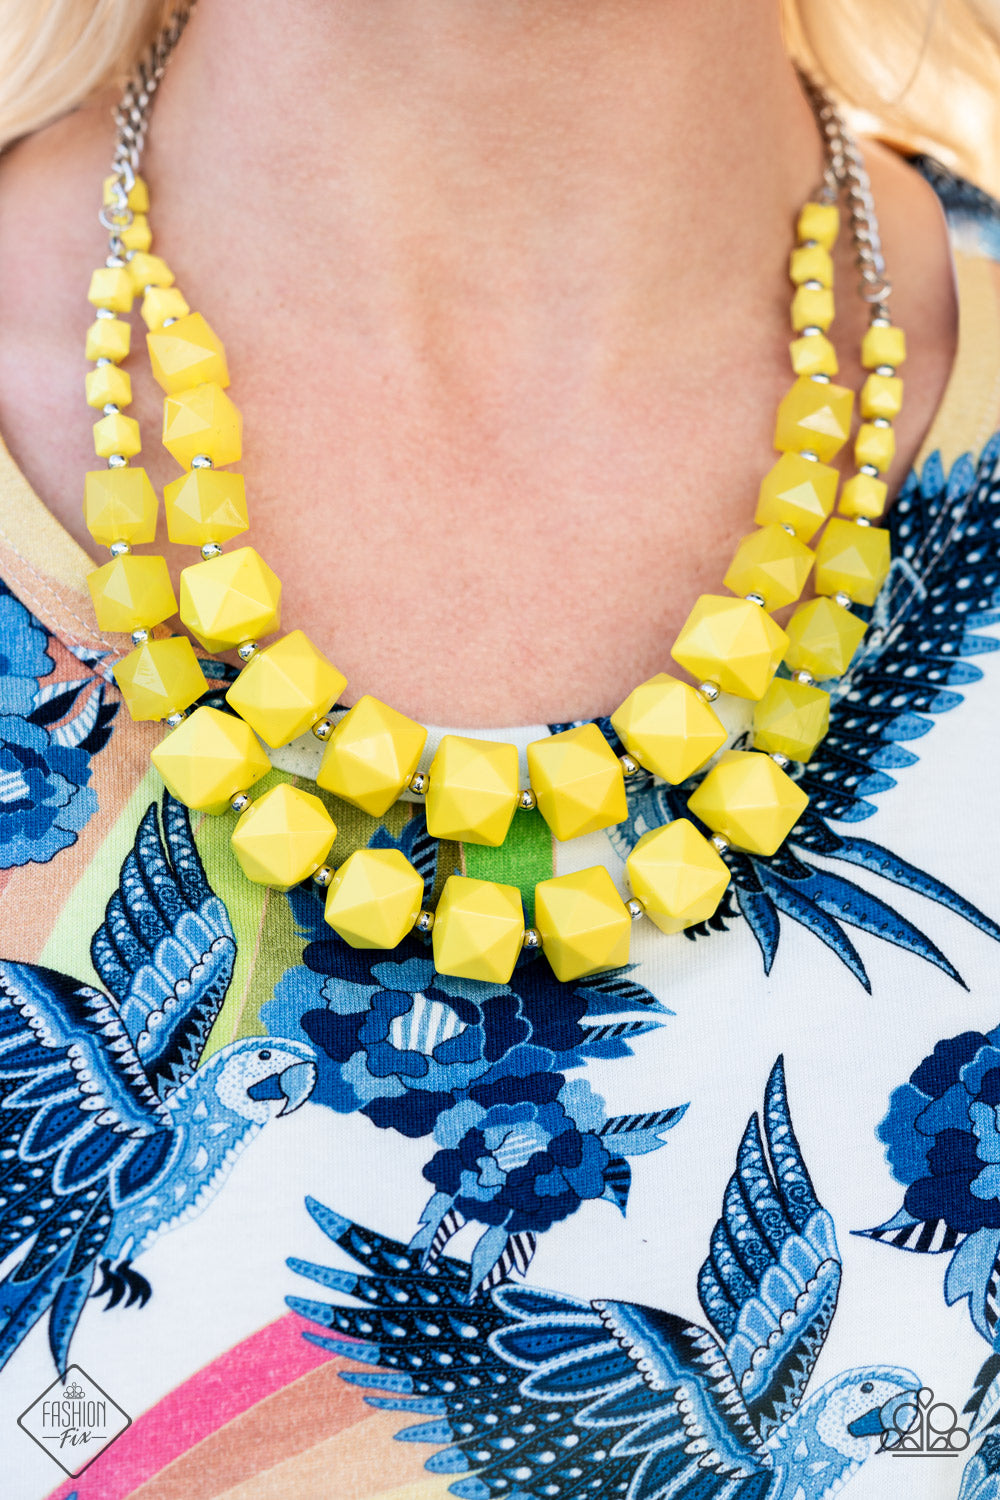 Summer Excursion - Yellow necklace (July 2021 - Fashion Fix)